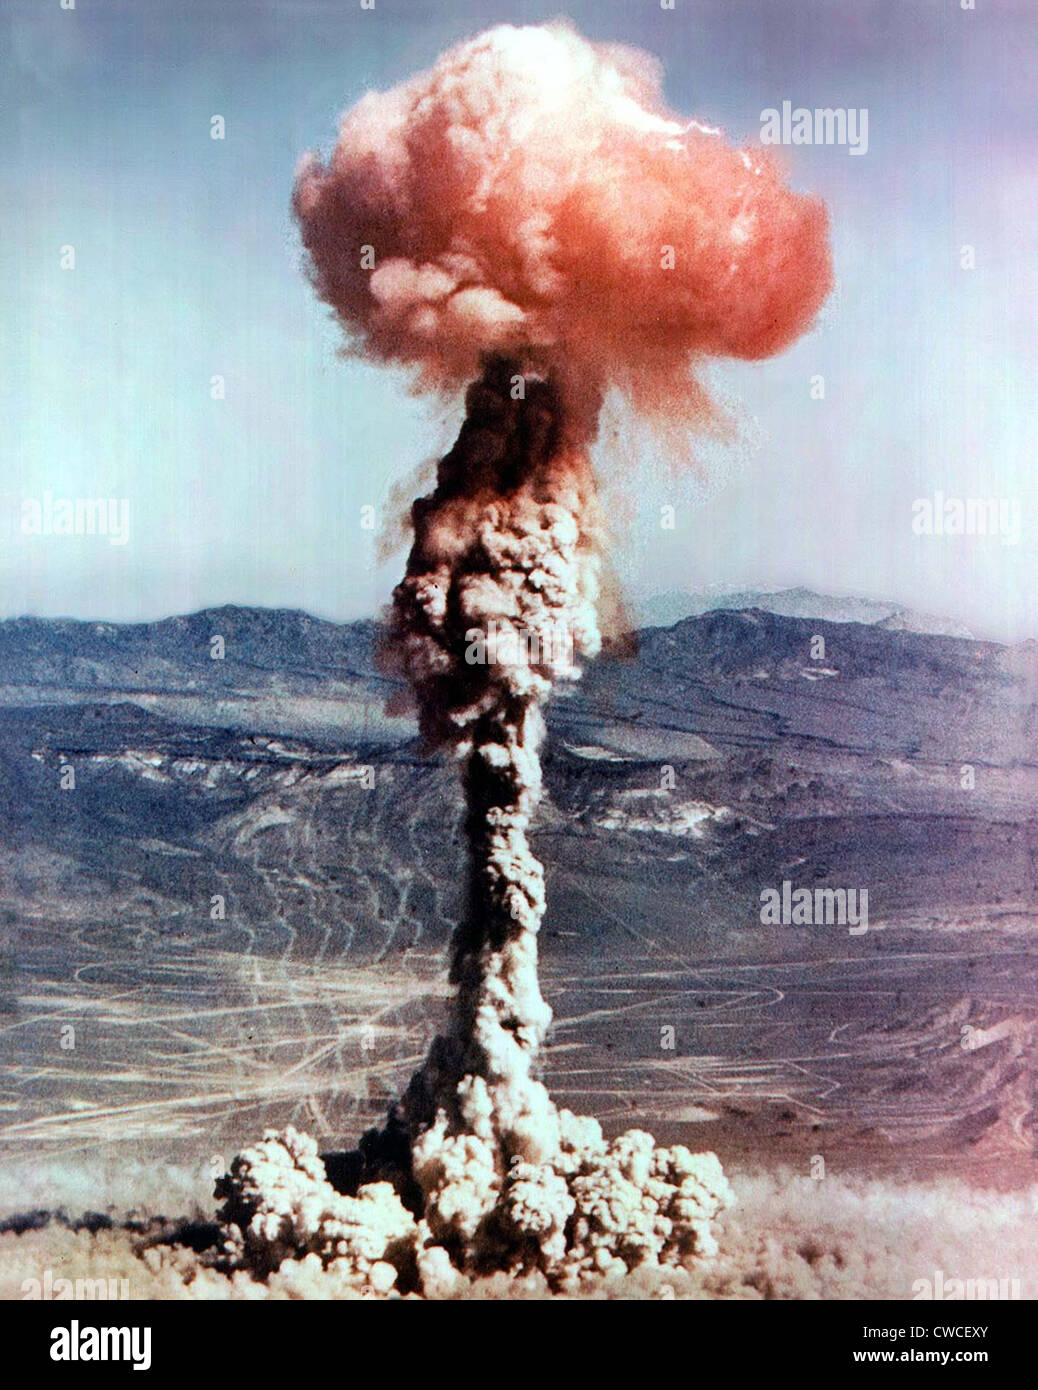 The CHARLIE shot was a 14 kiloton nuclear bomb dropped from a B-50 bomber at Yucca Flat. The test was part of the Buster-Jangle Stock Photo